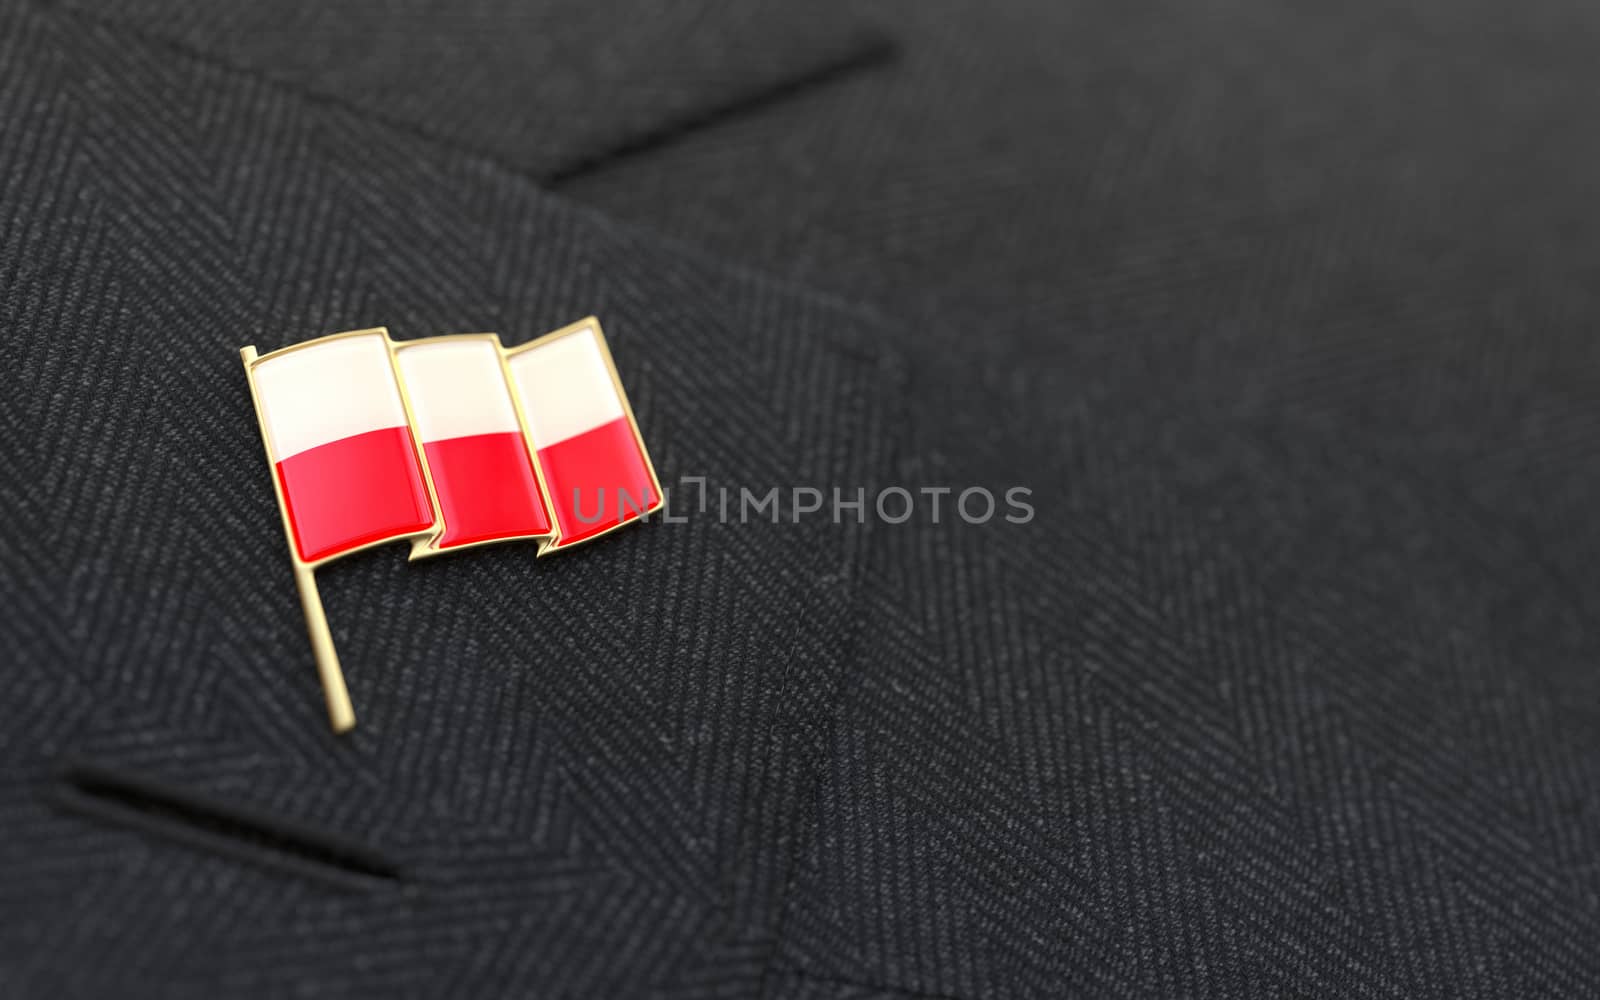 Poland flag lapel pin on the collar of a business suit jacket shows patriotism